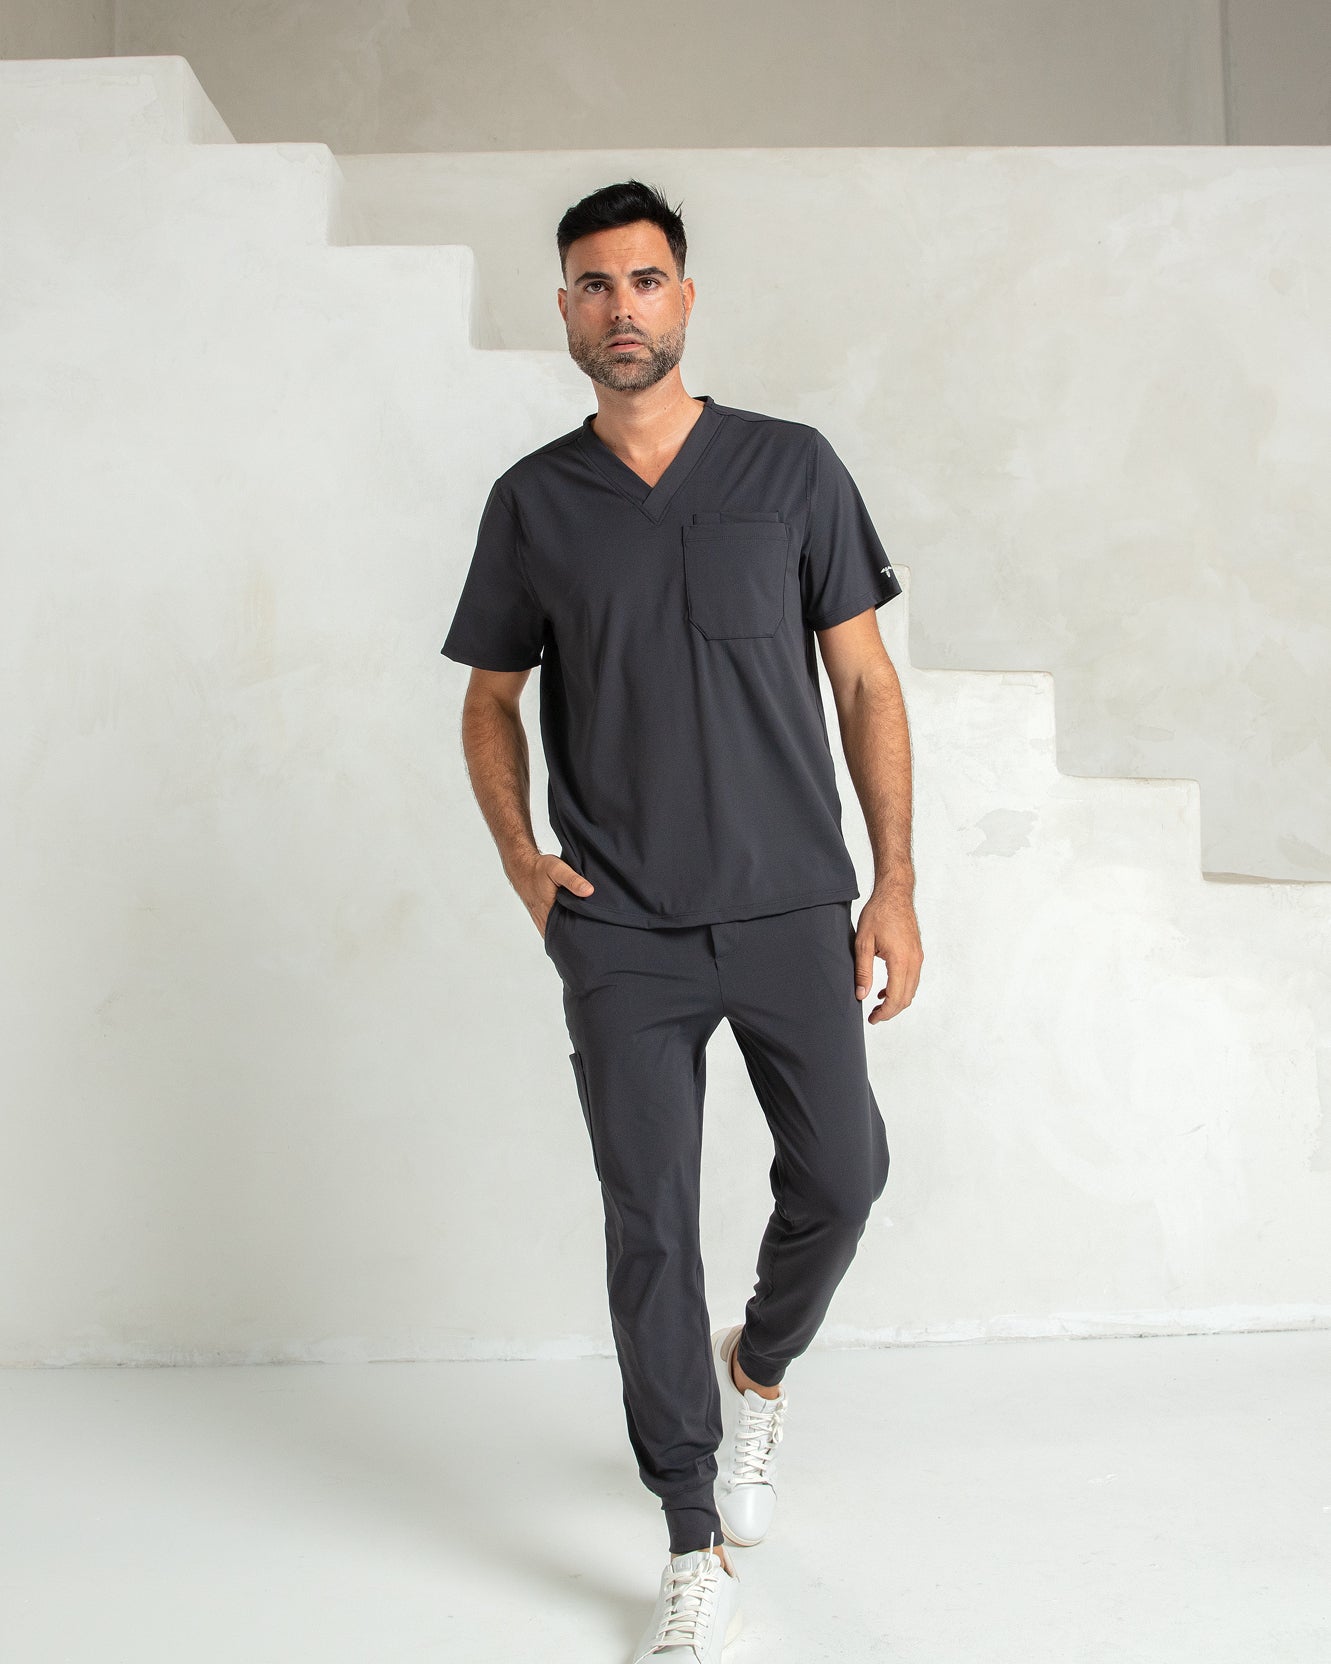 Shop Shabbella Performance Scrubs | Made in Los Angeles